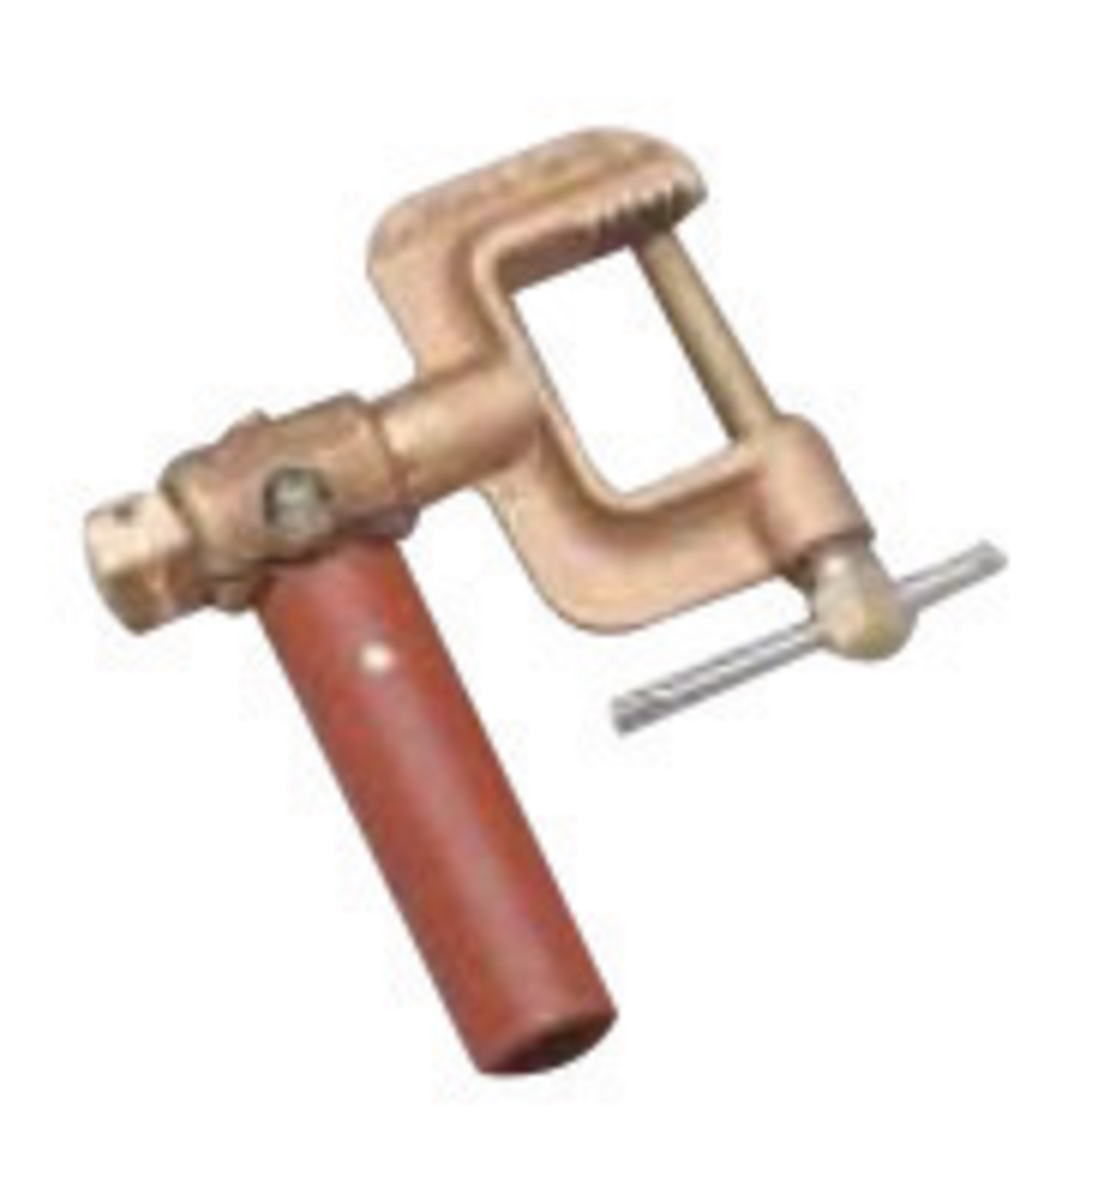 GROUND CLAMP COPPER Compatible with Tweco GC-300 WELDING GROUND CLAMP 300 AMPS